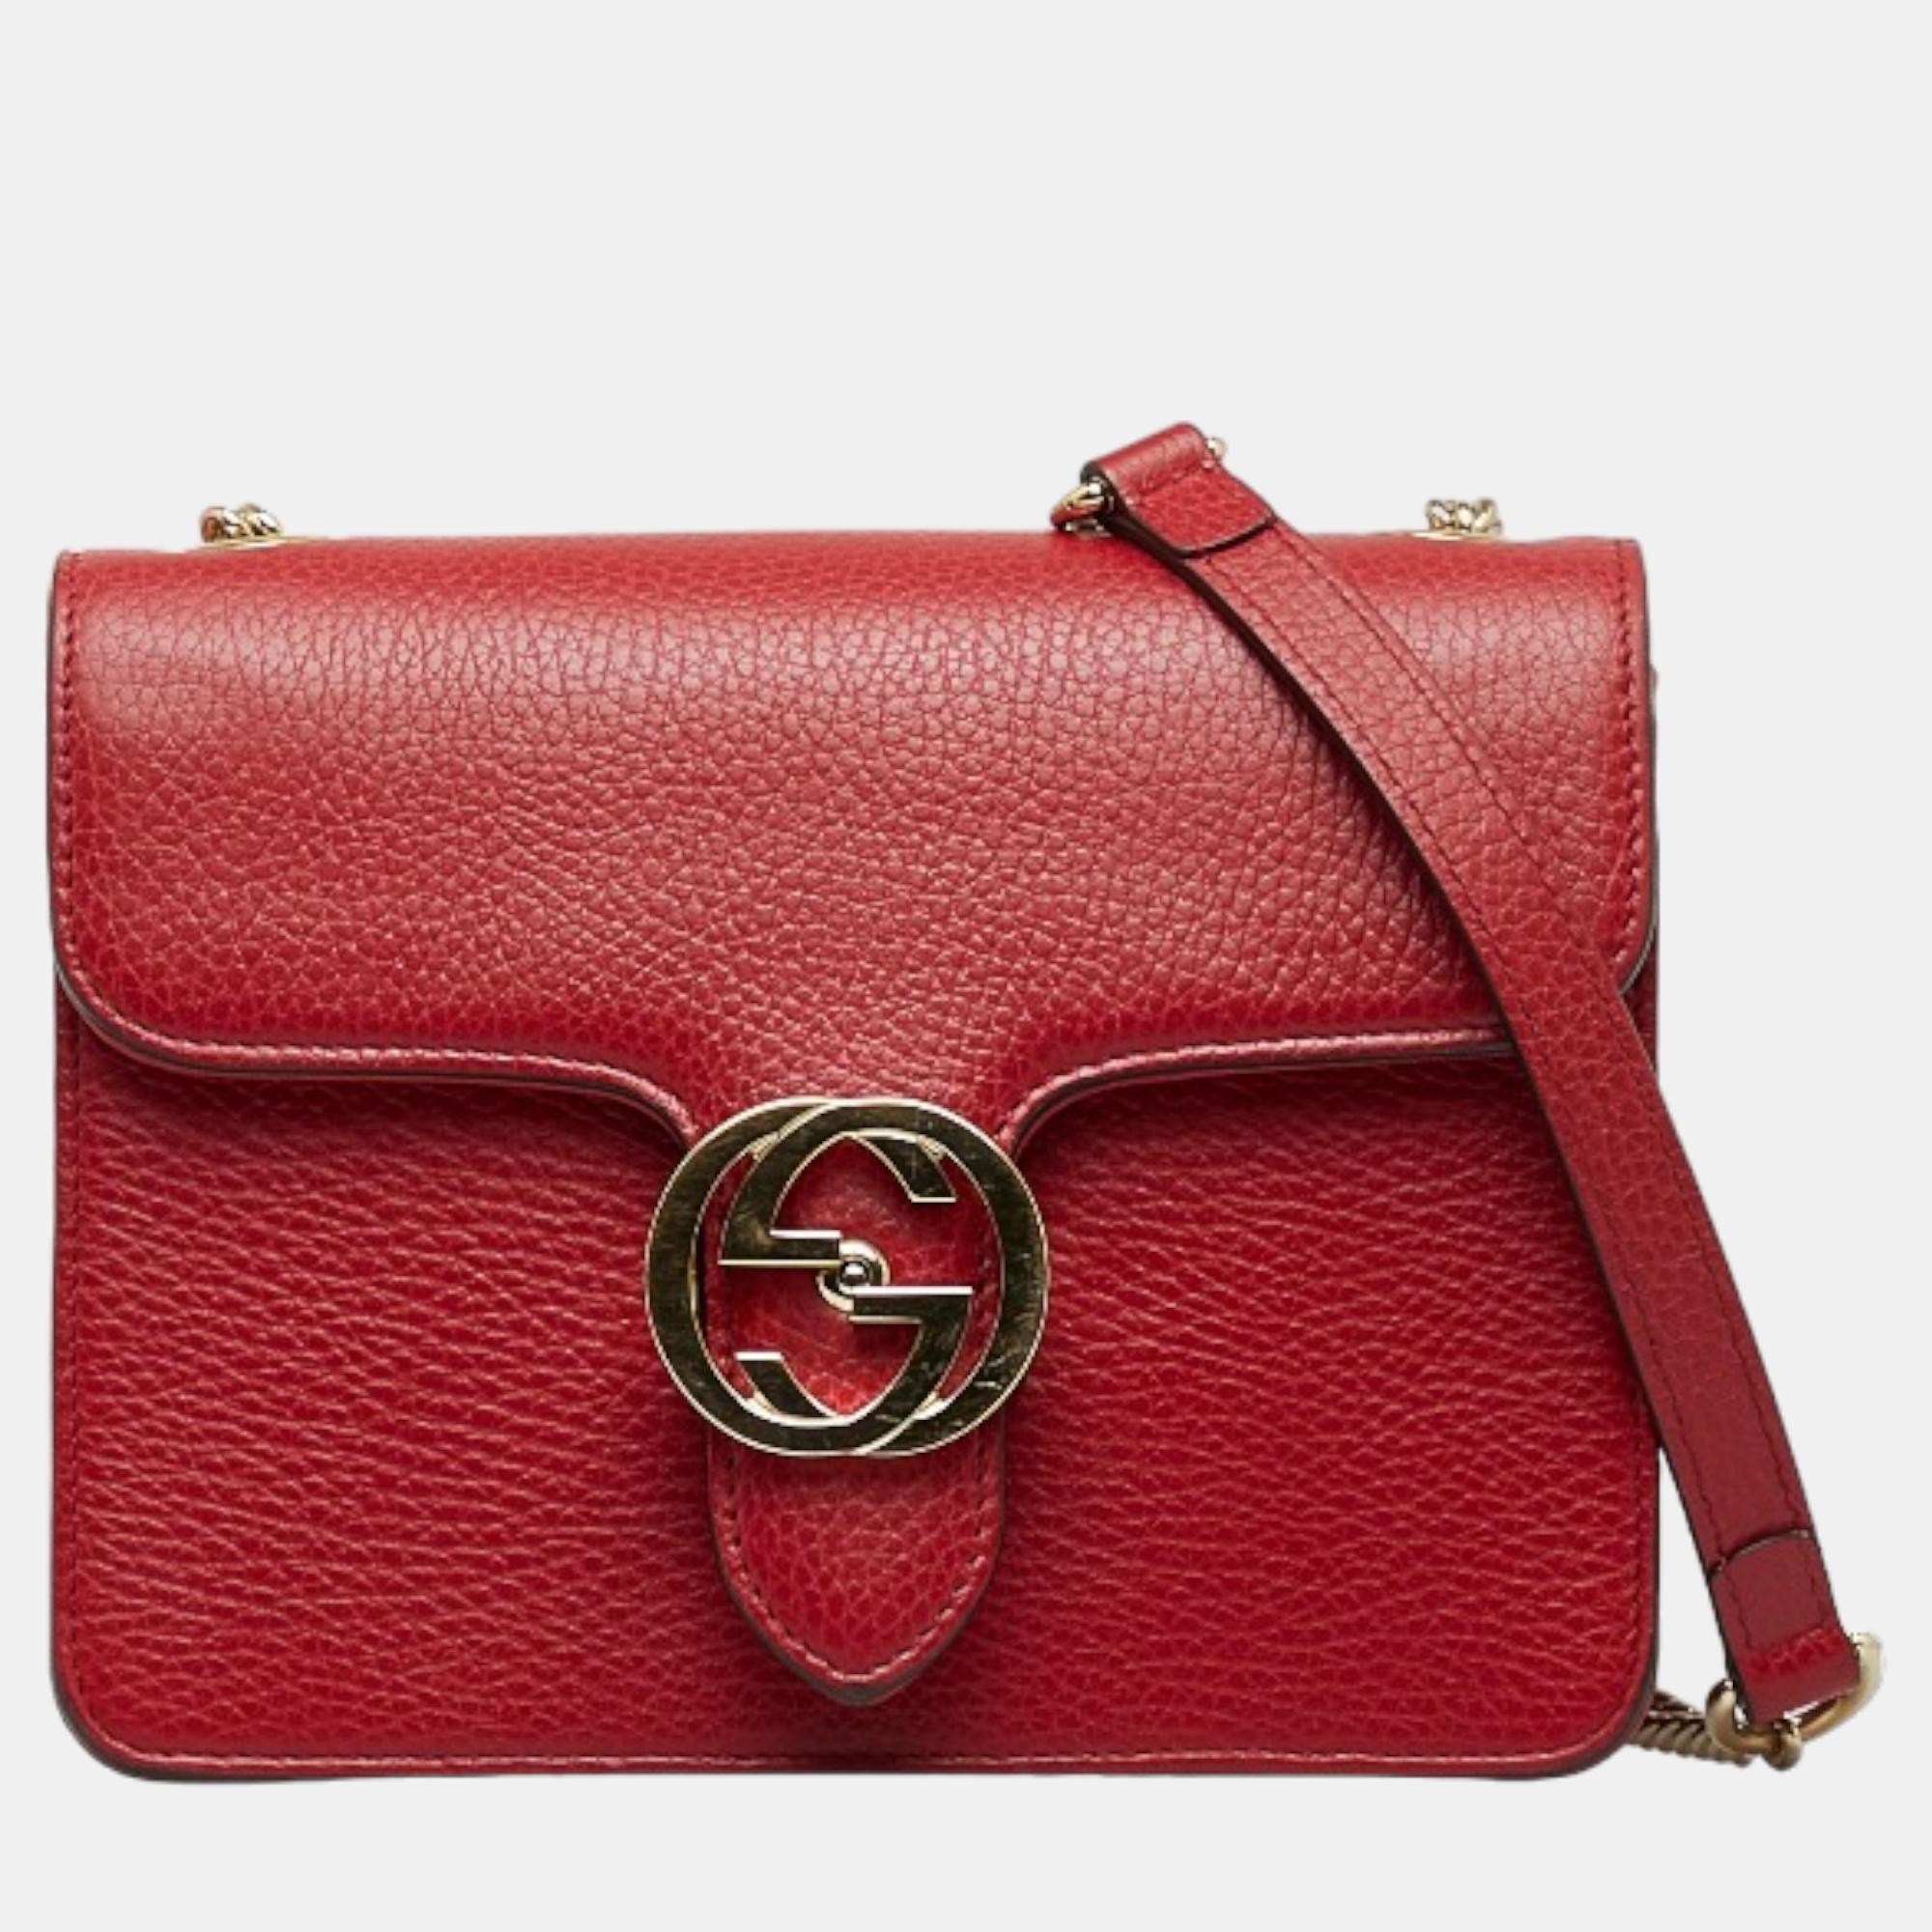 Pre-owned Gucci Red Leather Small Interlocking G Shoulder Bag